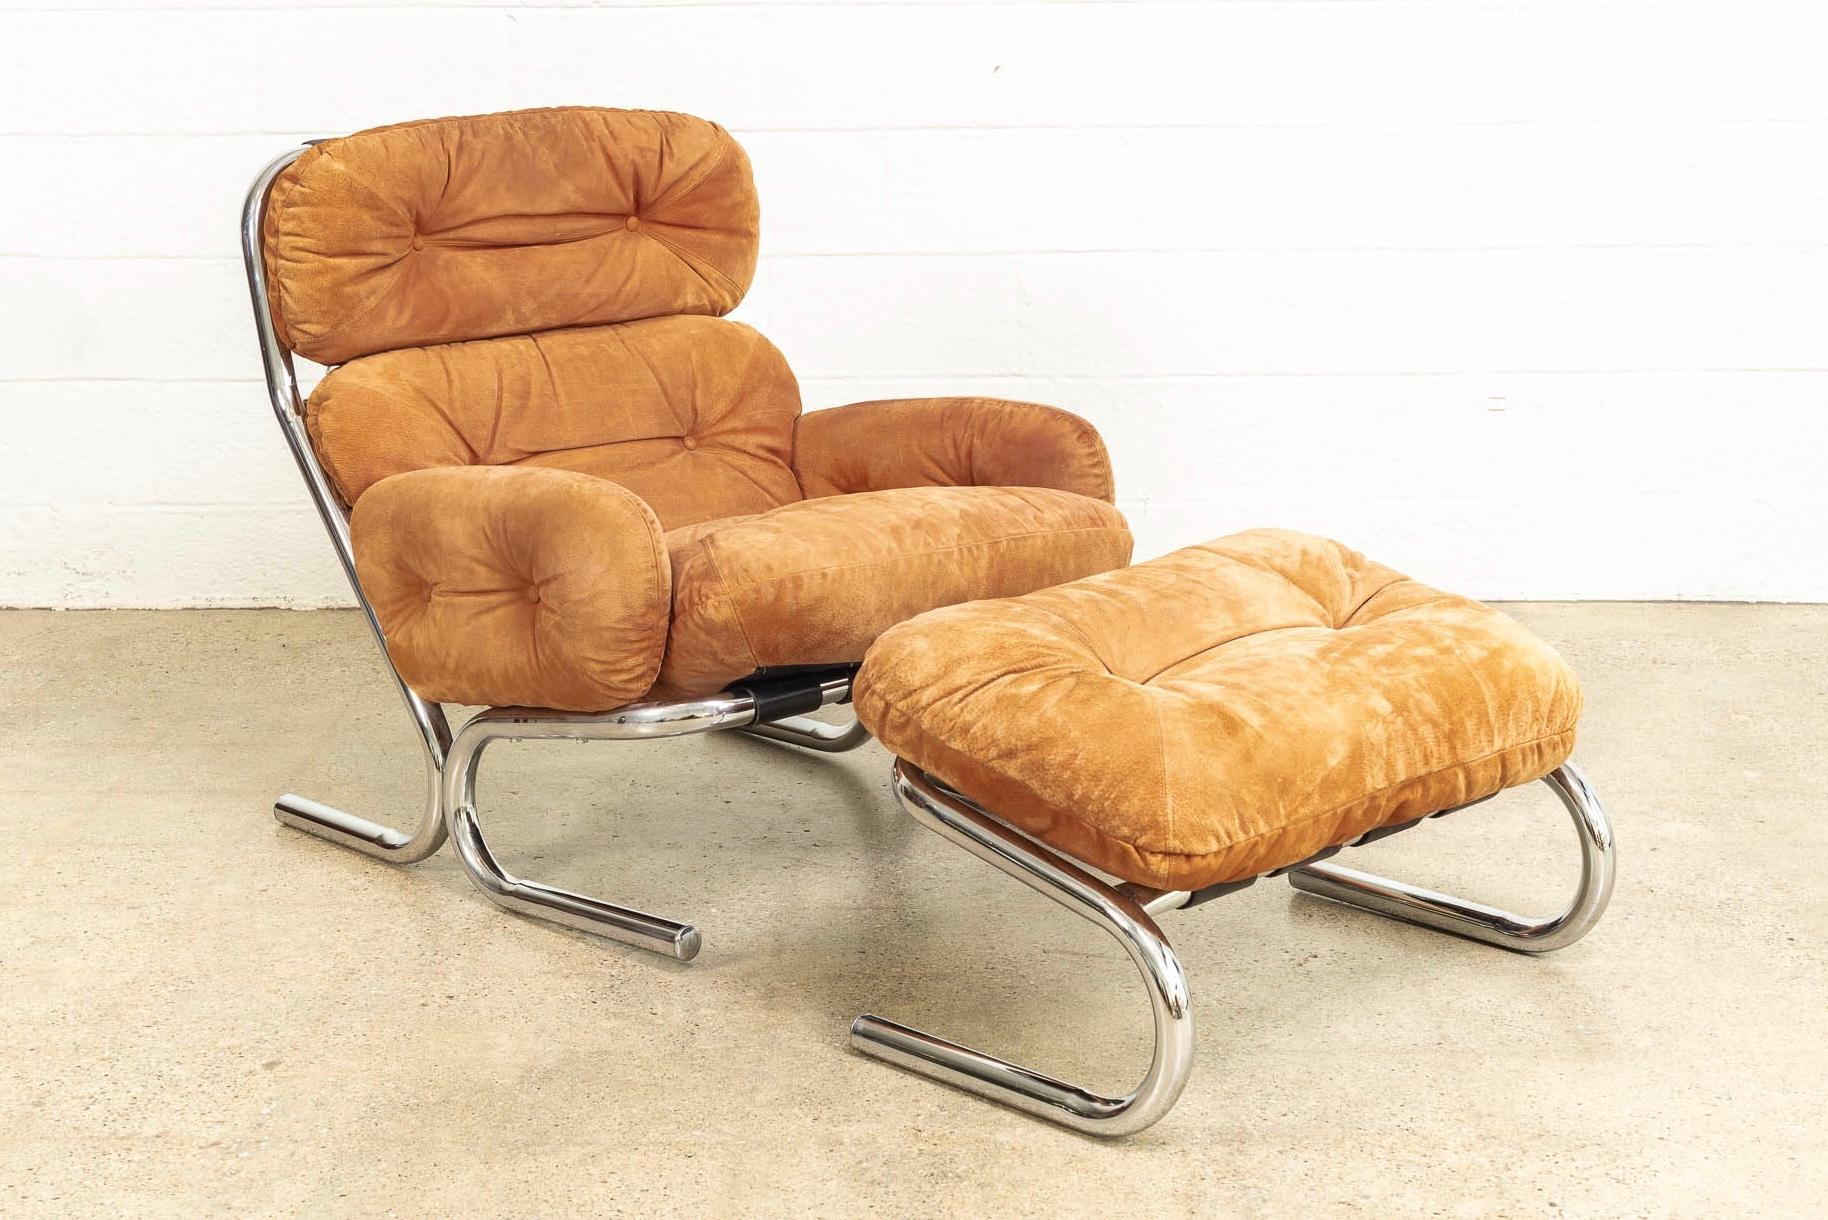 This vintage Mid-Century Modern Milo Baughman for Directional lounge chair and ottoman is circa 1970. The mod design features original orange suede upholstery with a polished chrome tubular sculpted base. The chair is roomy, comfortable and well